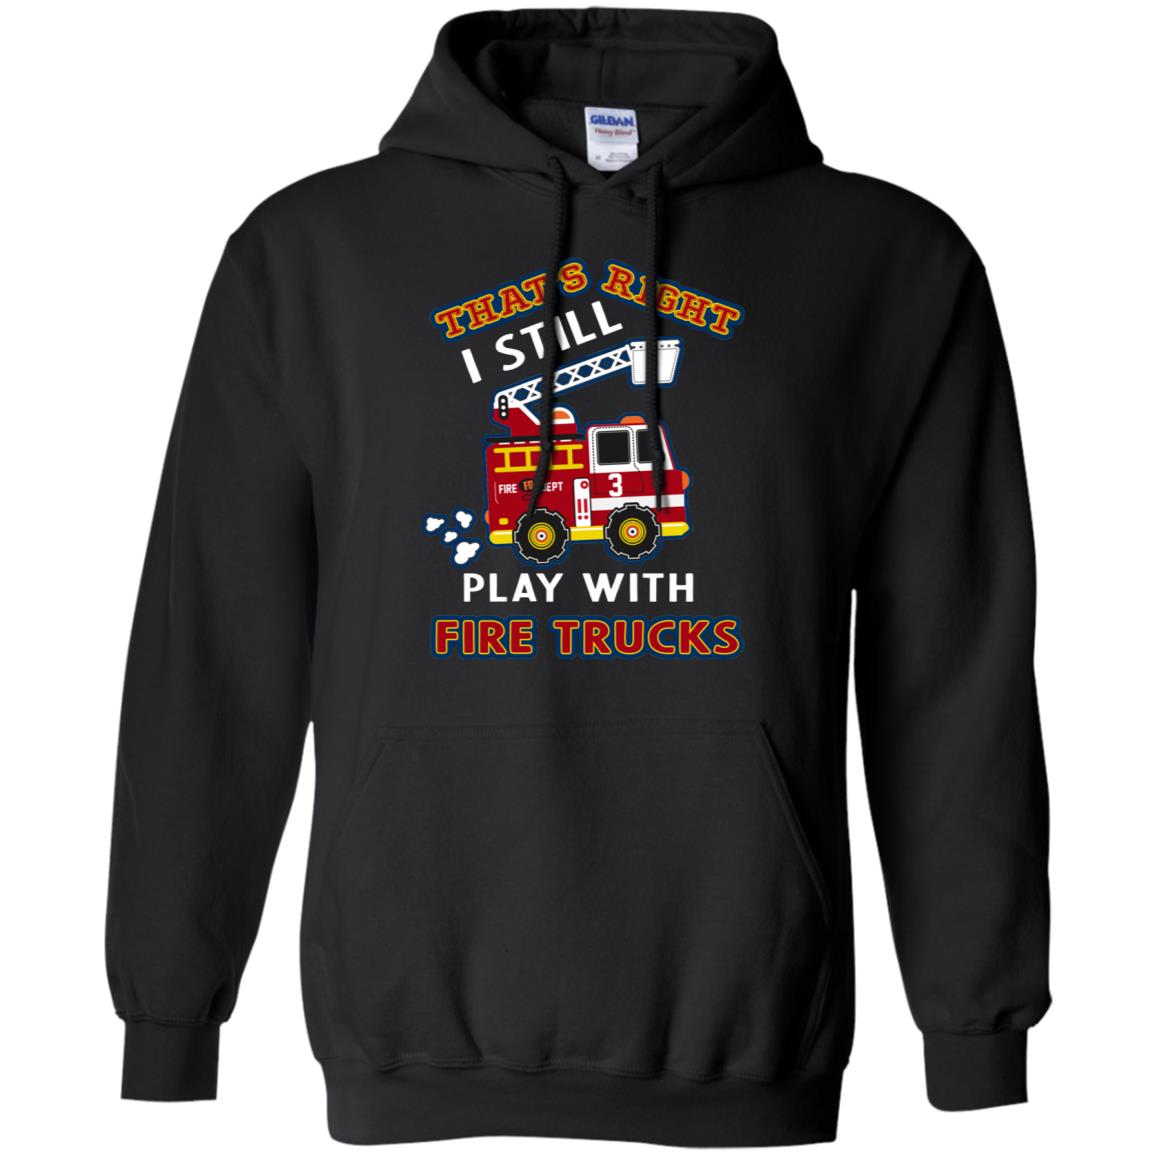 That's Right I Still Play With Fire Trucks Shirt For Mens WomensG185 Gildan Pullover Hoodie 8 oz.